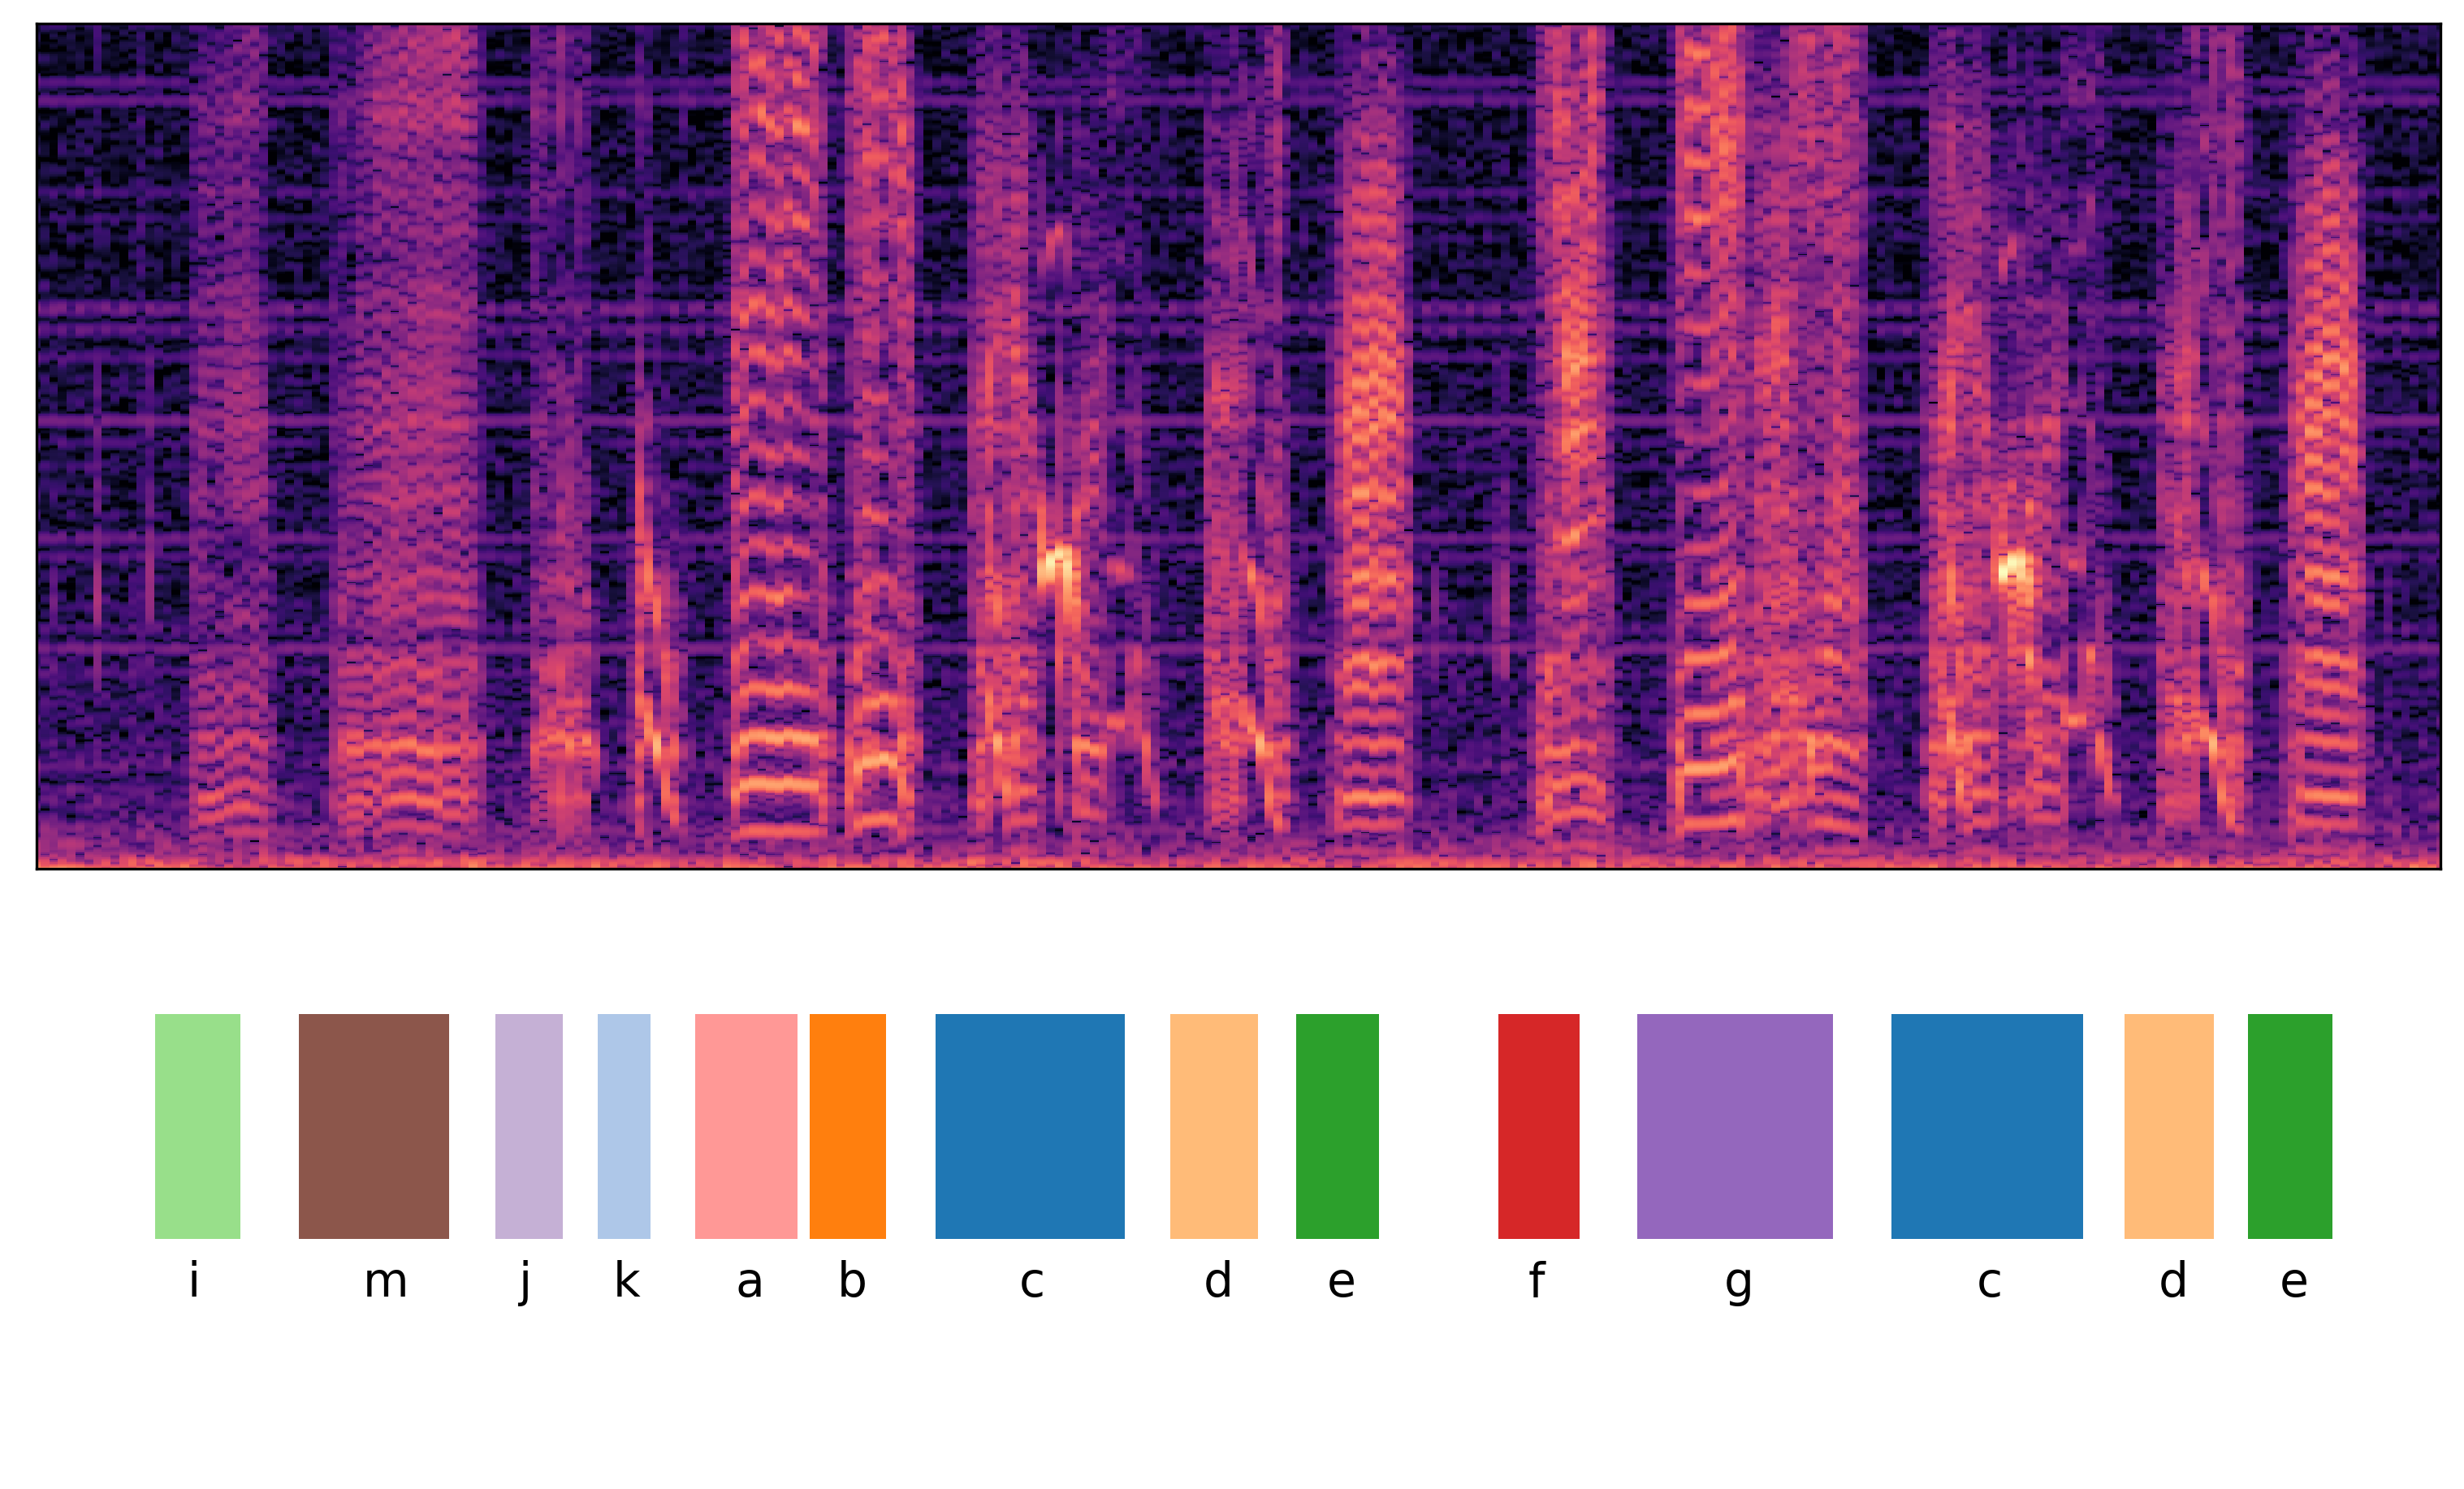 Spectrogram showing snippet of Bengalese finch song with annotated syllables, for bird with ID gr41rd51